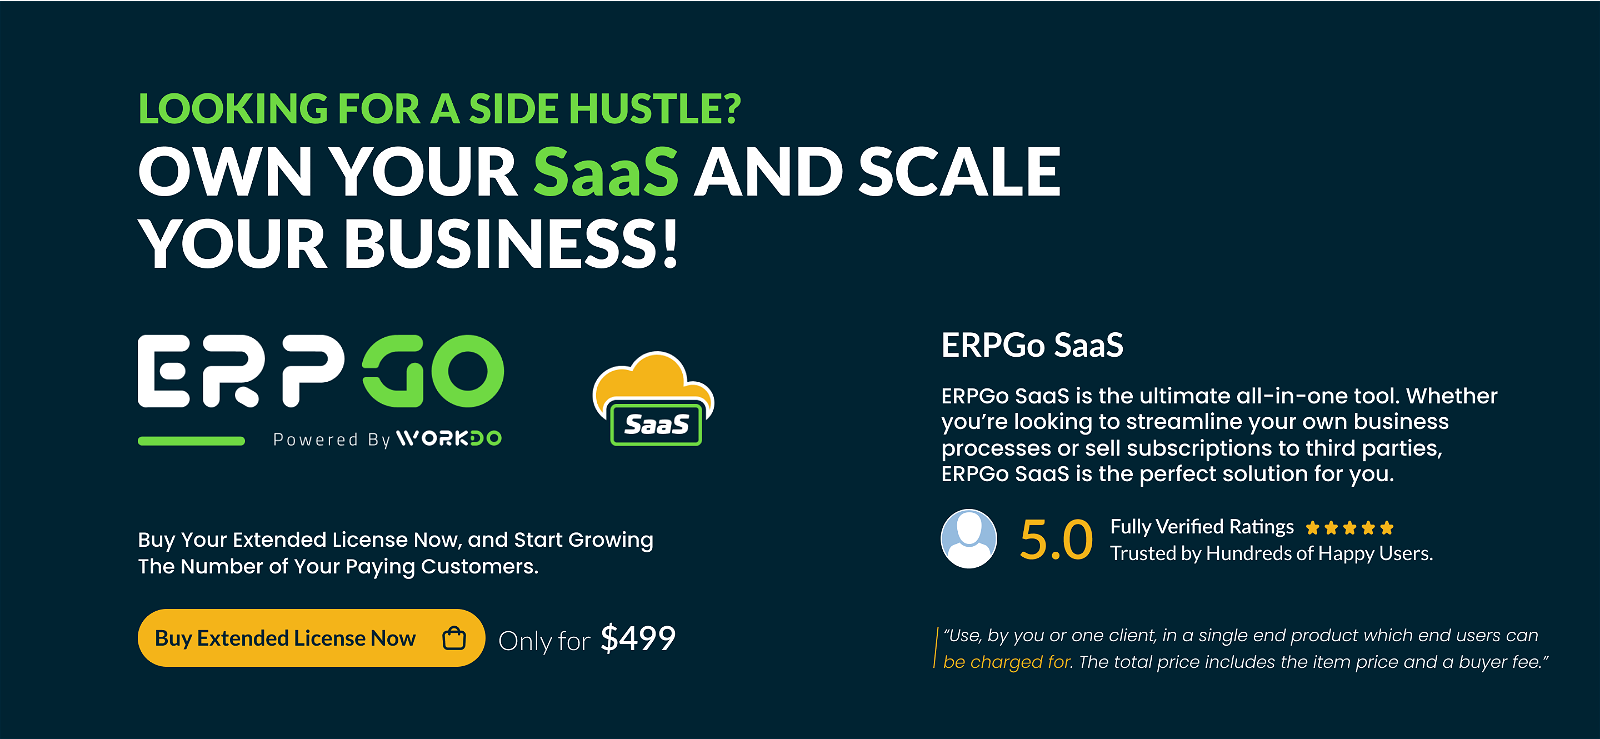 ERPGo SaaS - All In One Business ERP With Project, Account, HRM & CRM - 6